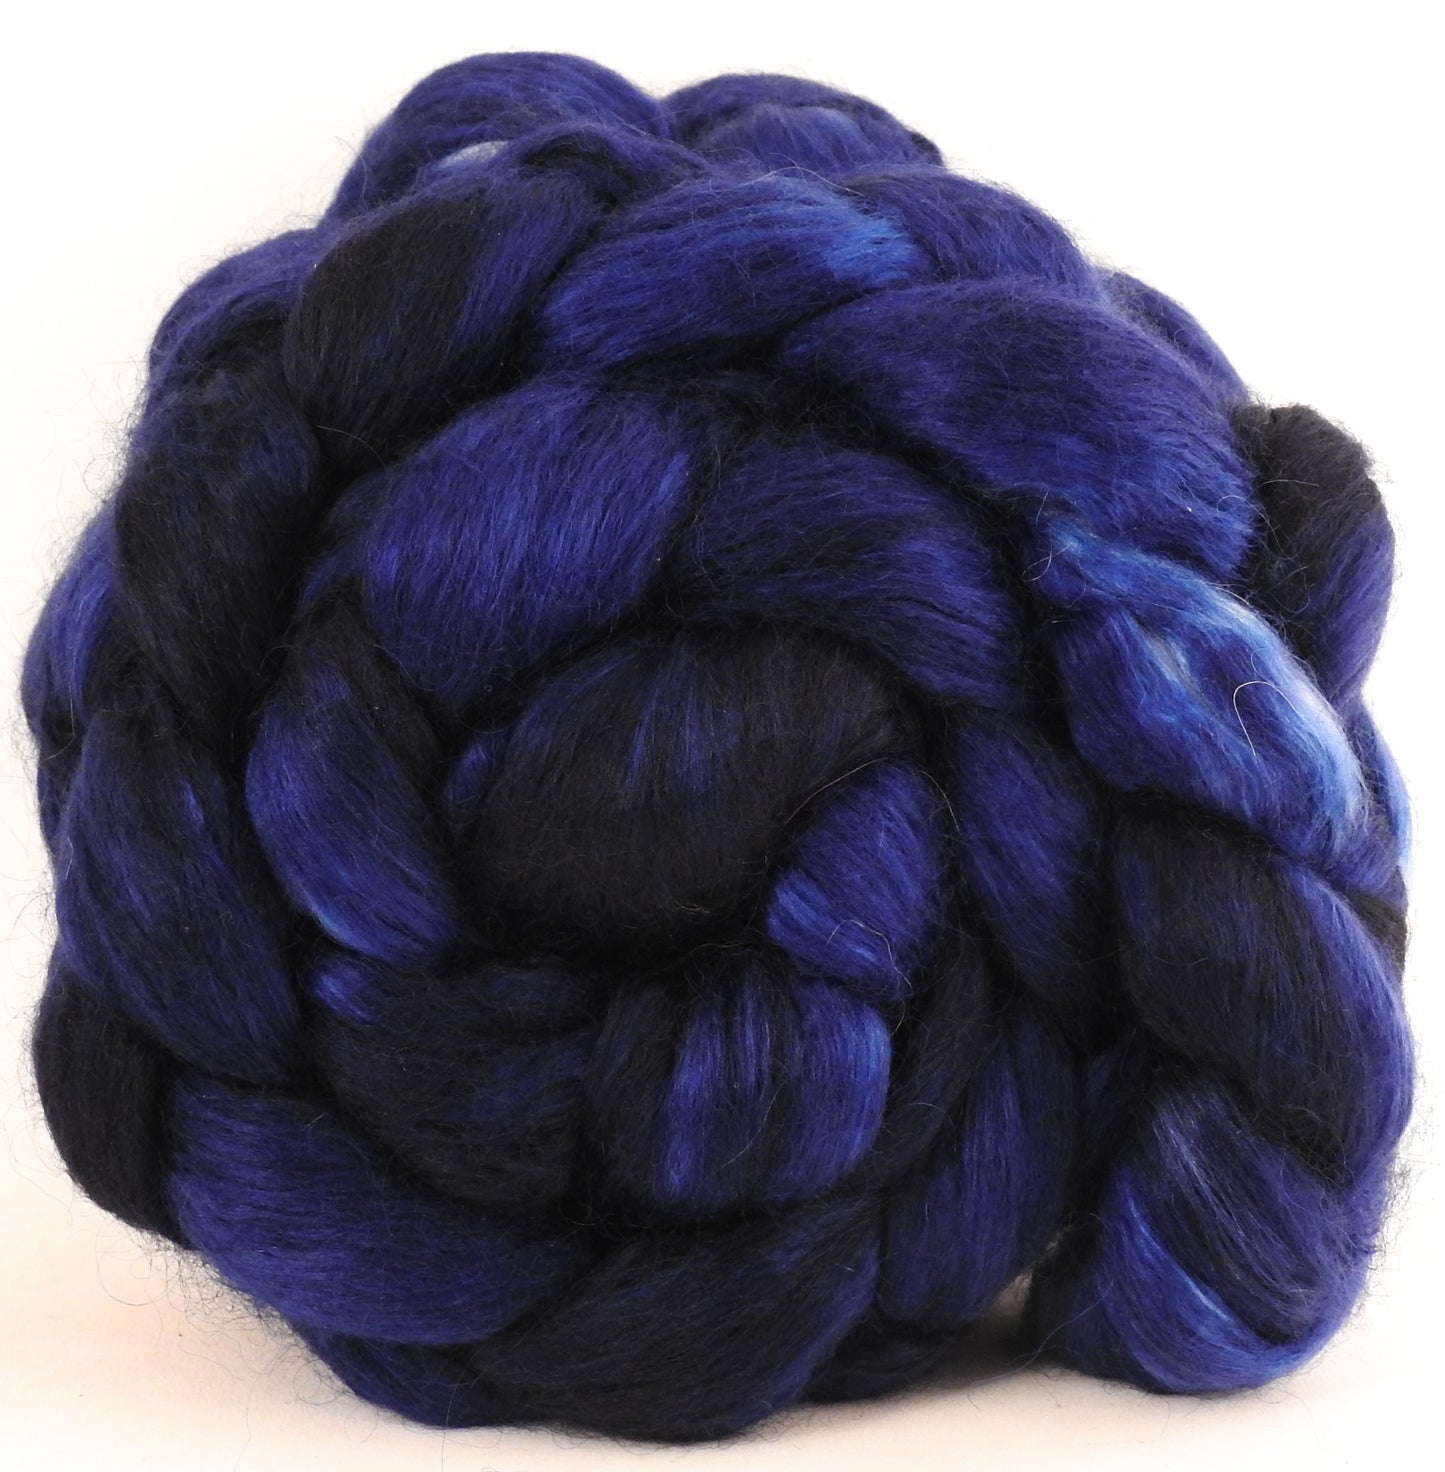 Hand-dyed wensleydale/ mulberry silk roving (65/35) - Lights Out - Inglenook Fibers